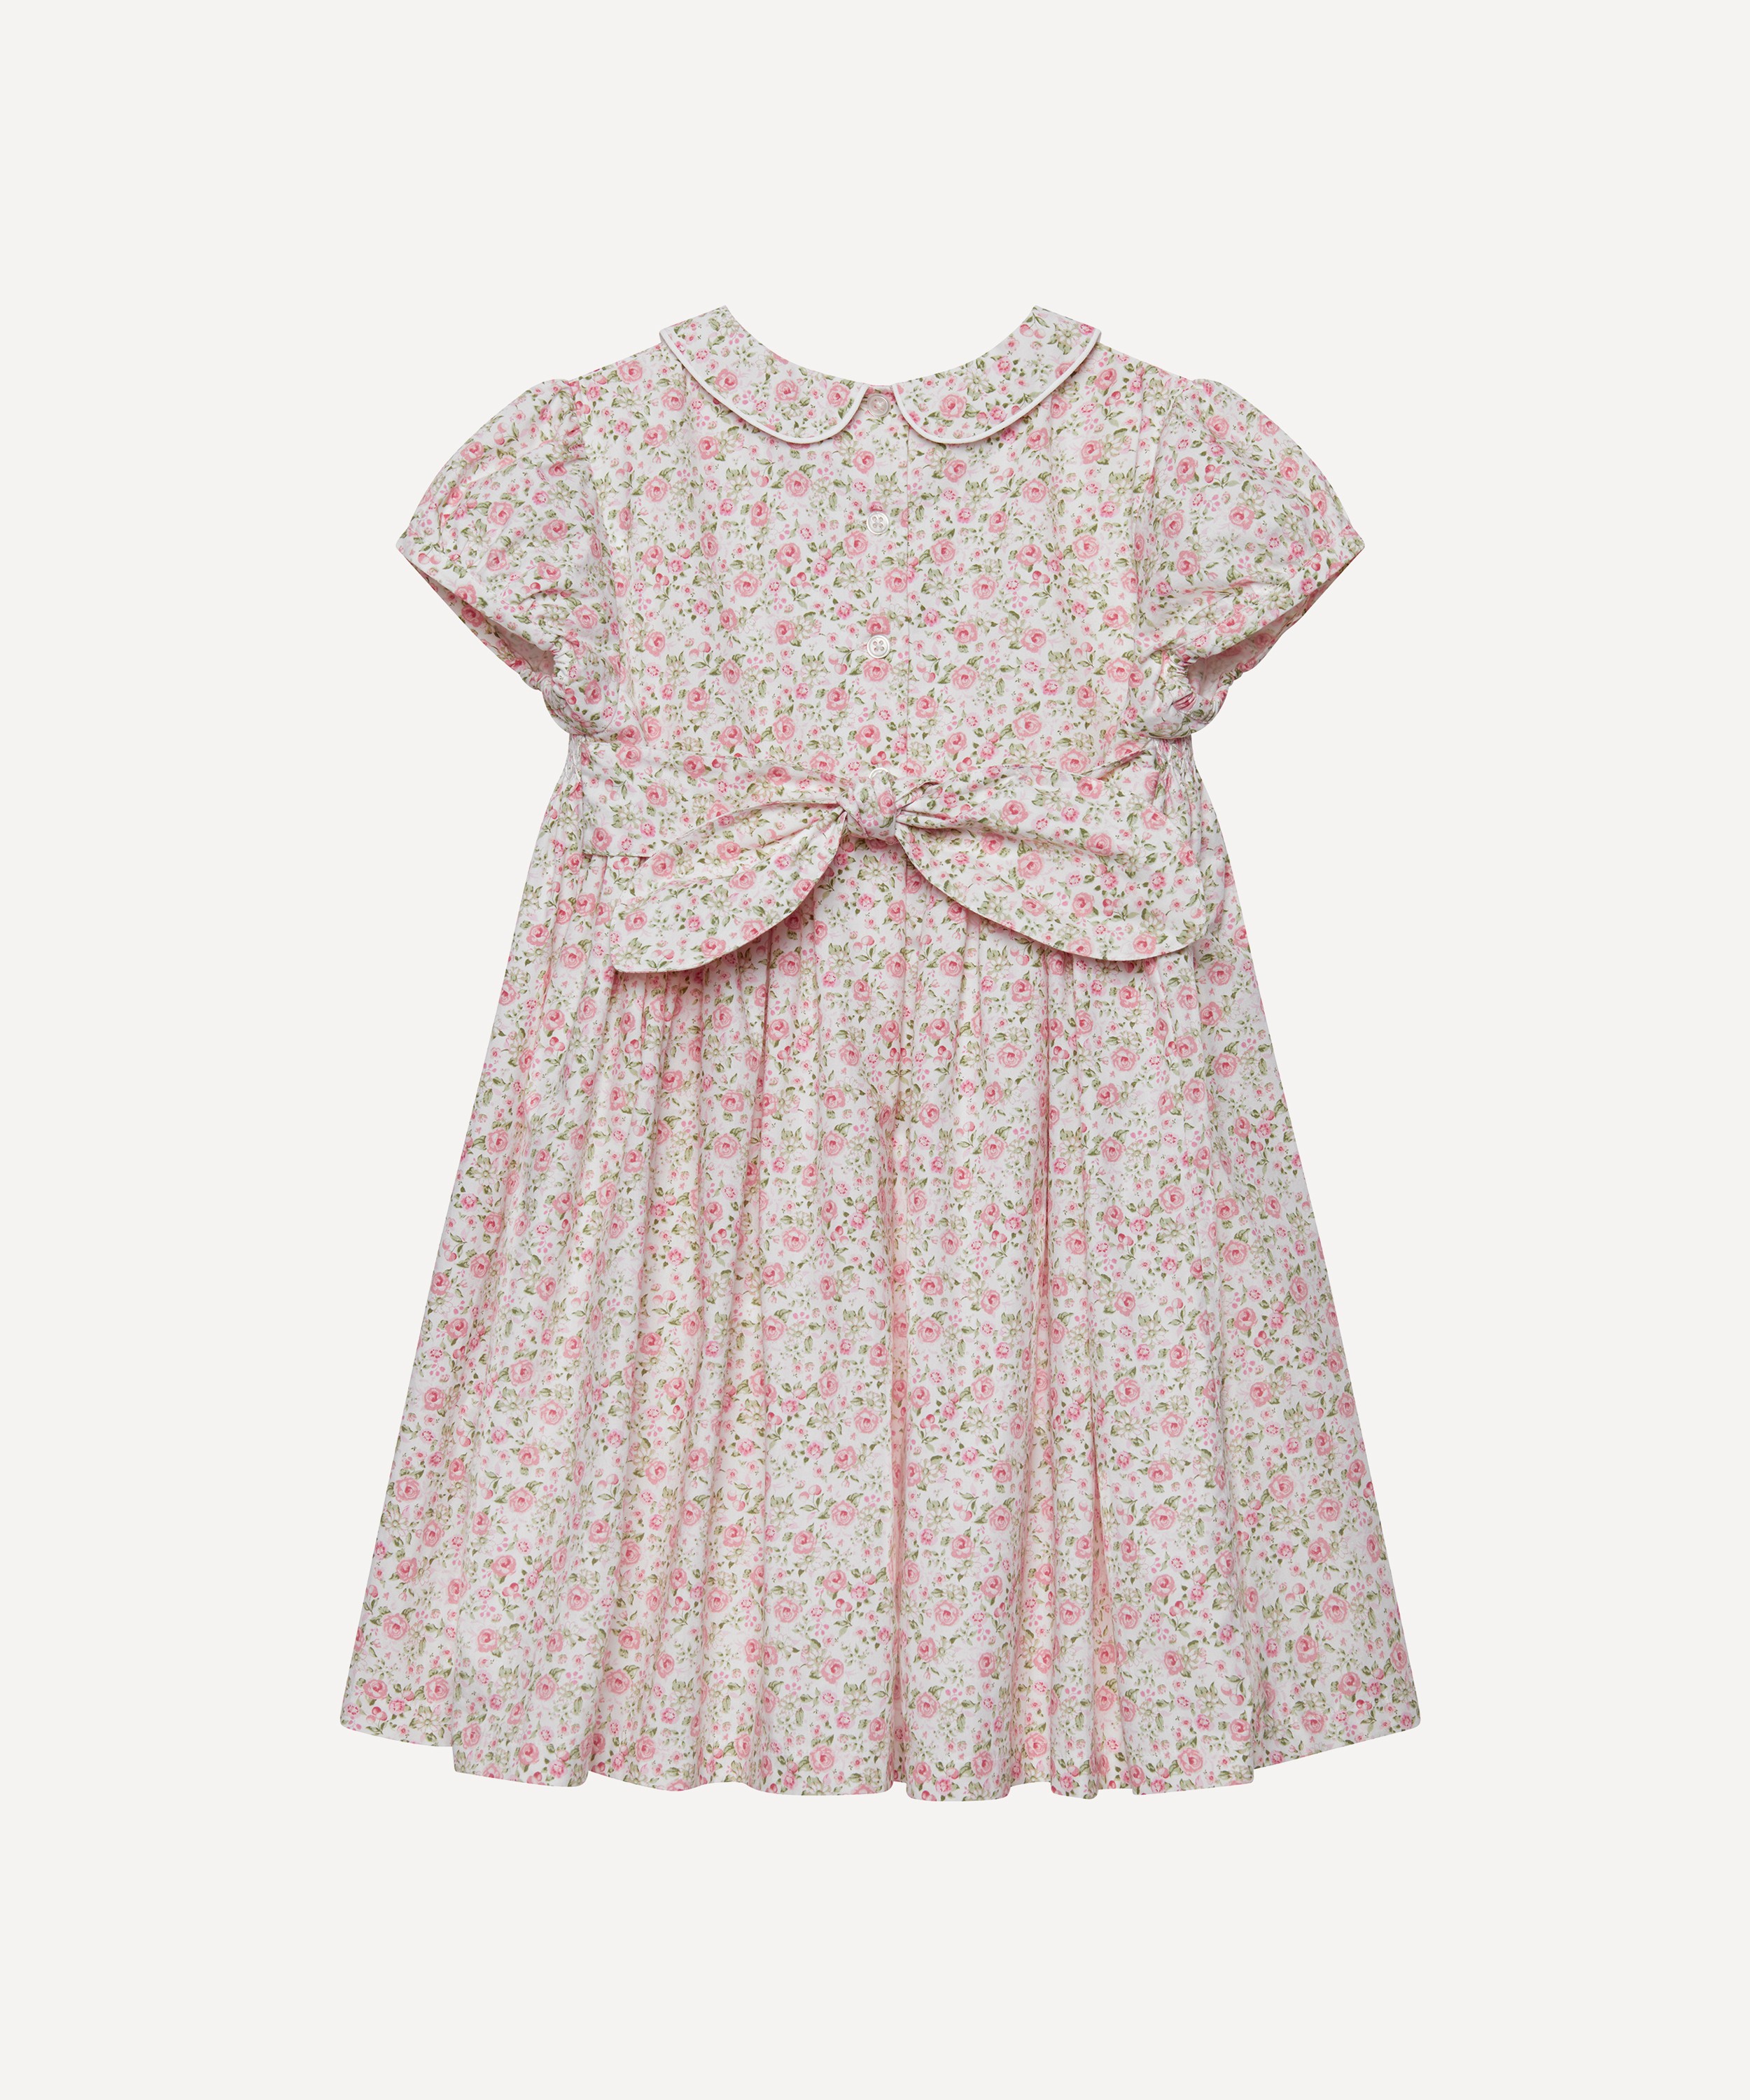 Trotters - Catherine Rose Smocked Dress 2-7 Years image number 1